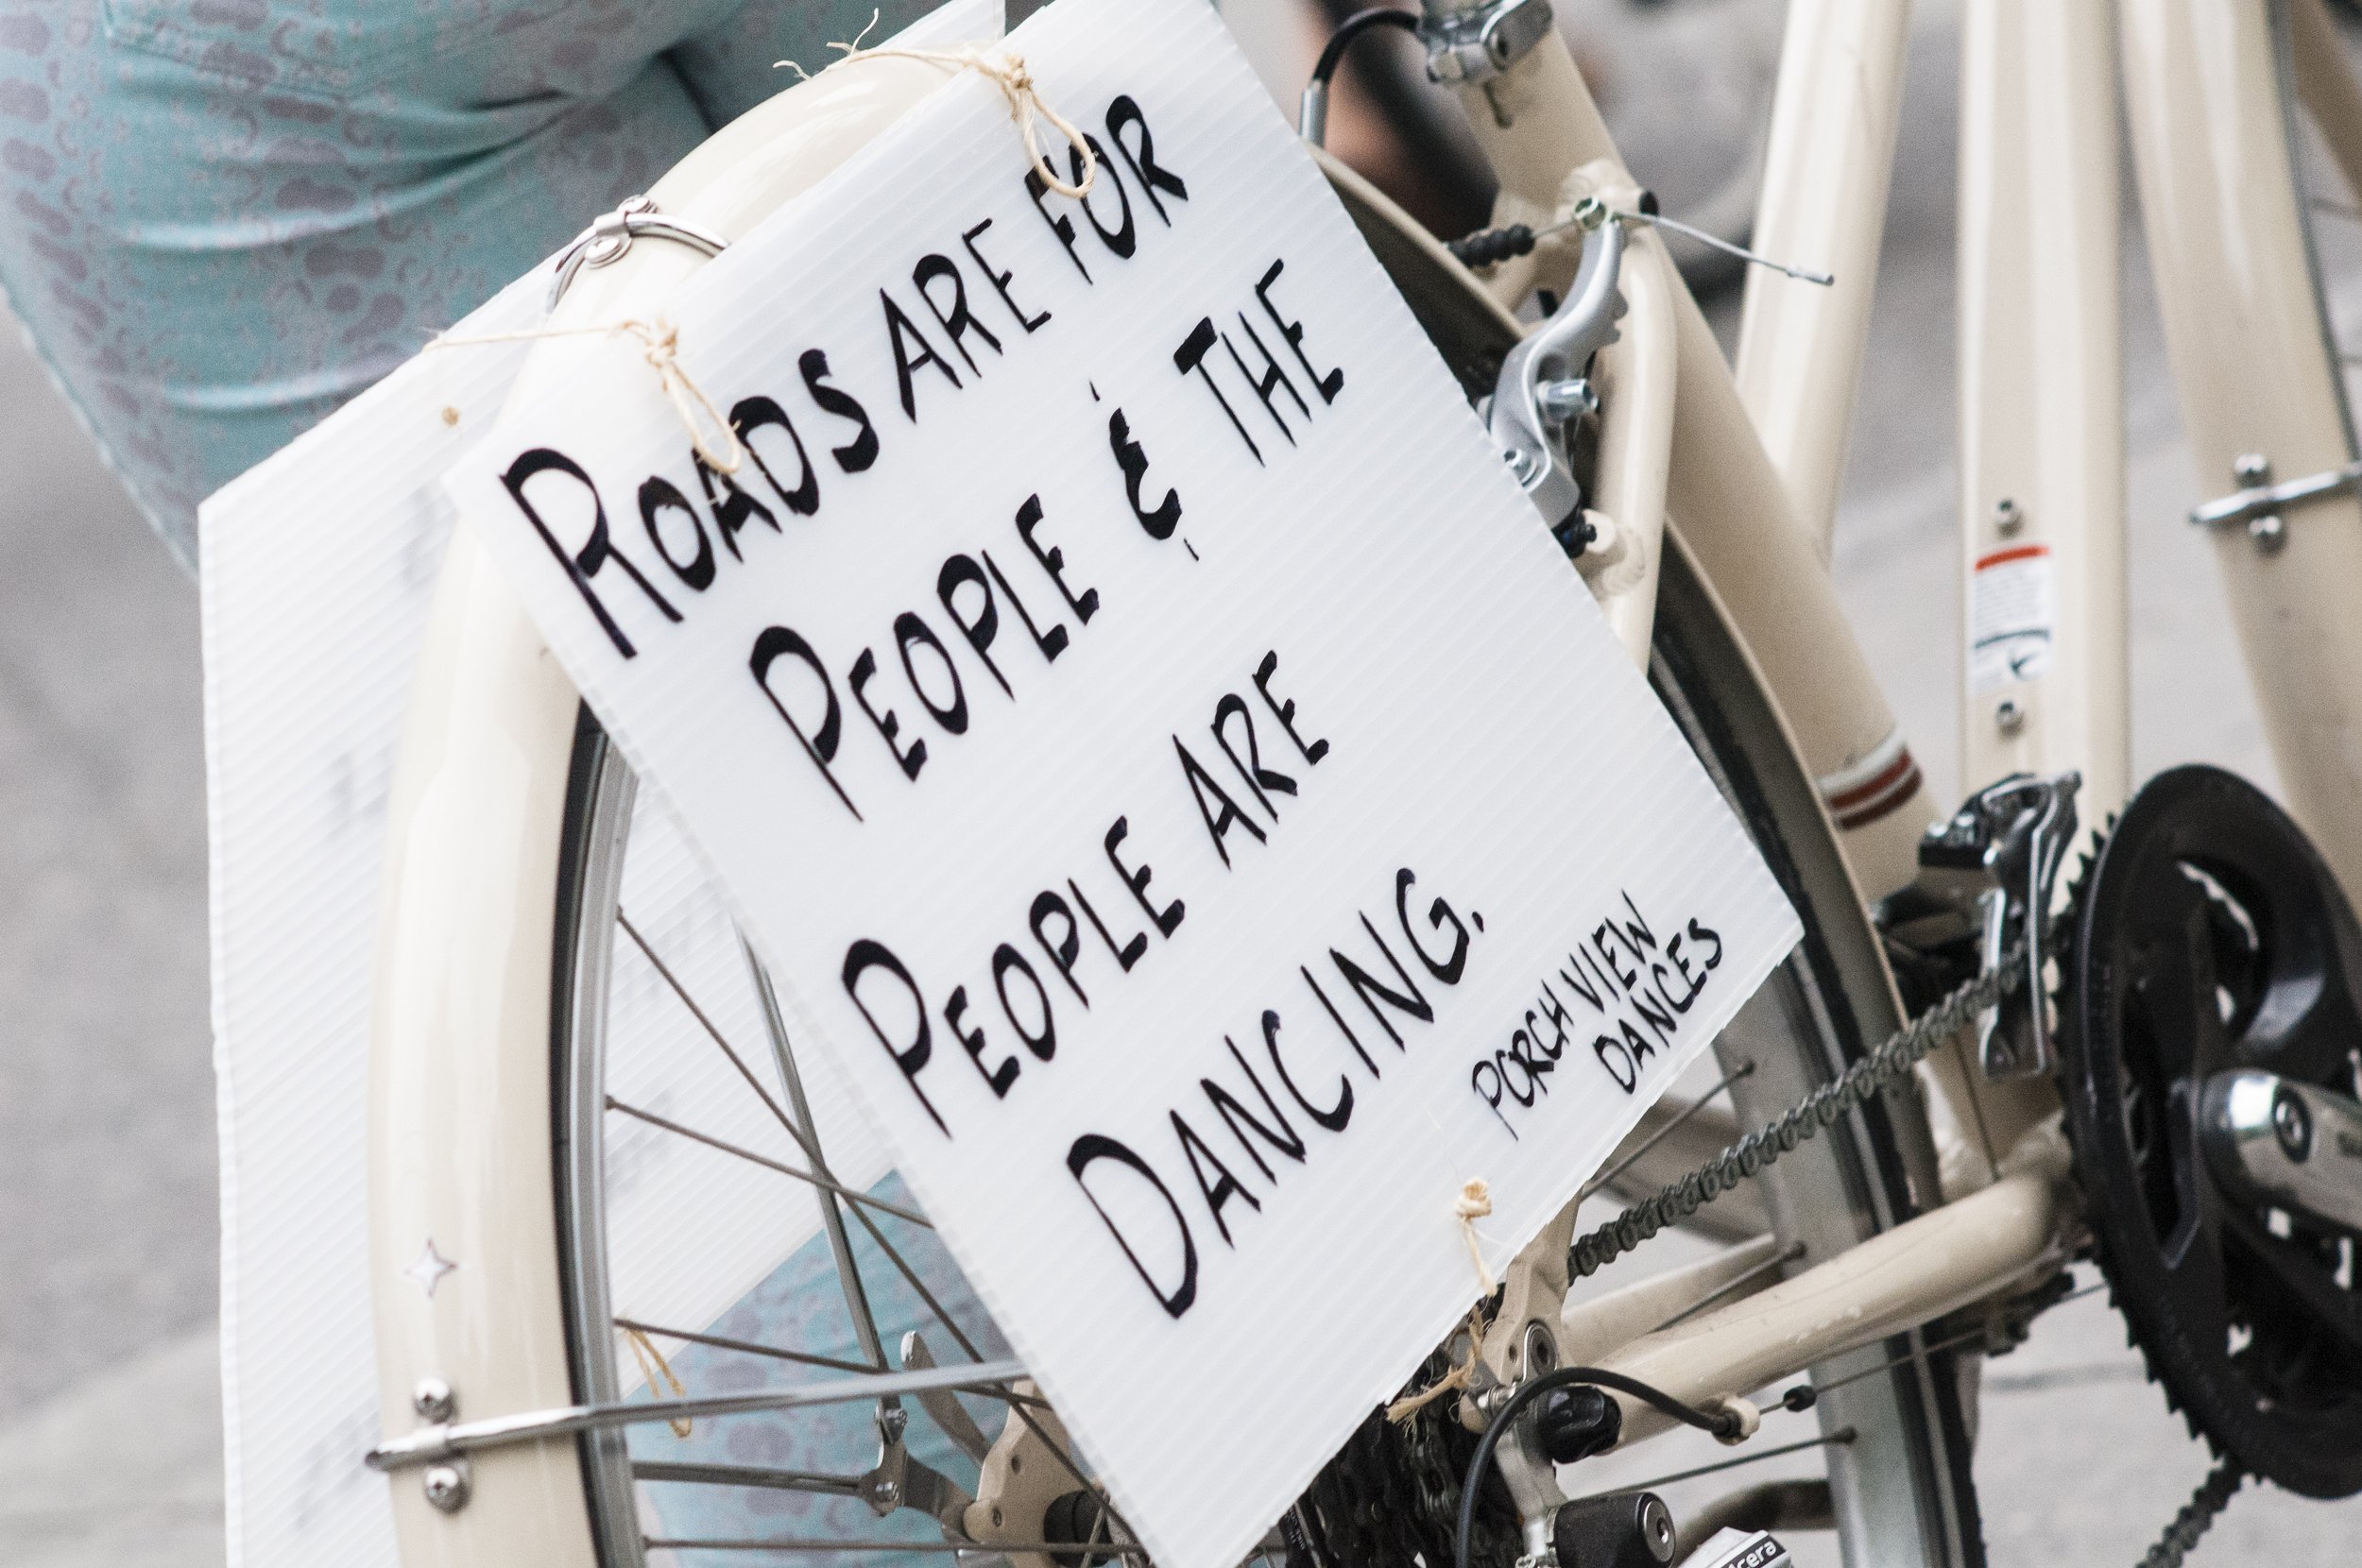 A sign on a bike tire: "Rpads are for people &amp; the people are dancing. Porch View Dances"